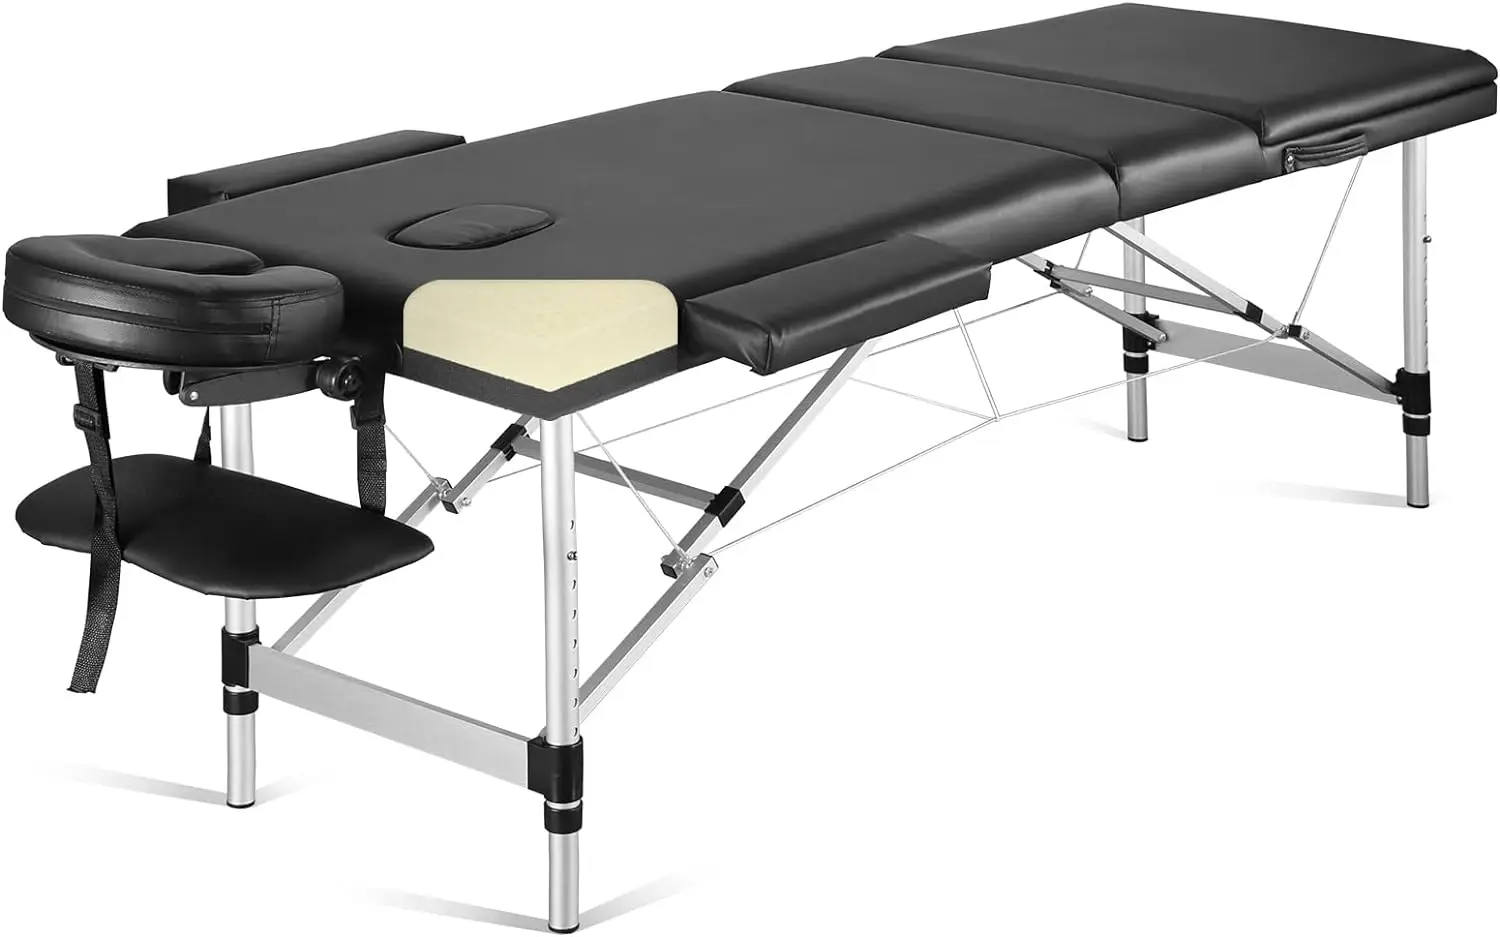 Careboda Portable Massage Table Professional Massage Bed 3 Fold 82 Inches Height Adjustable for Spa Salon Lash Tattoo with Alumi professional making umbrellas two fold golf umbrellas hex angular 50t steel shaft auto open manual close double layer windproof